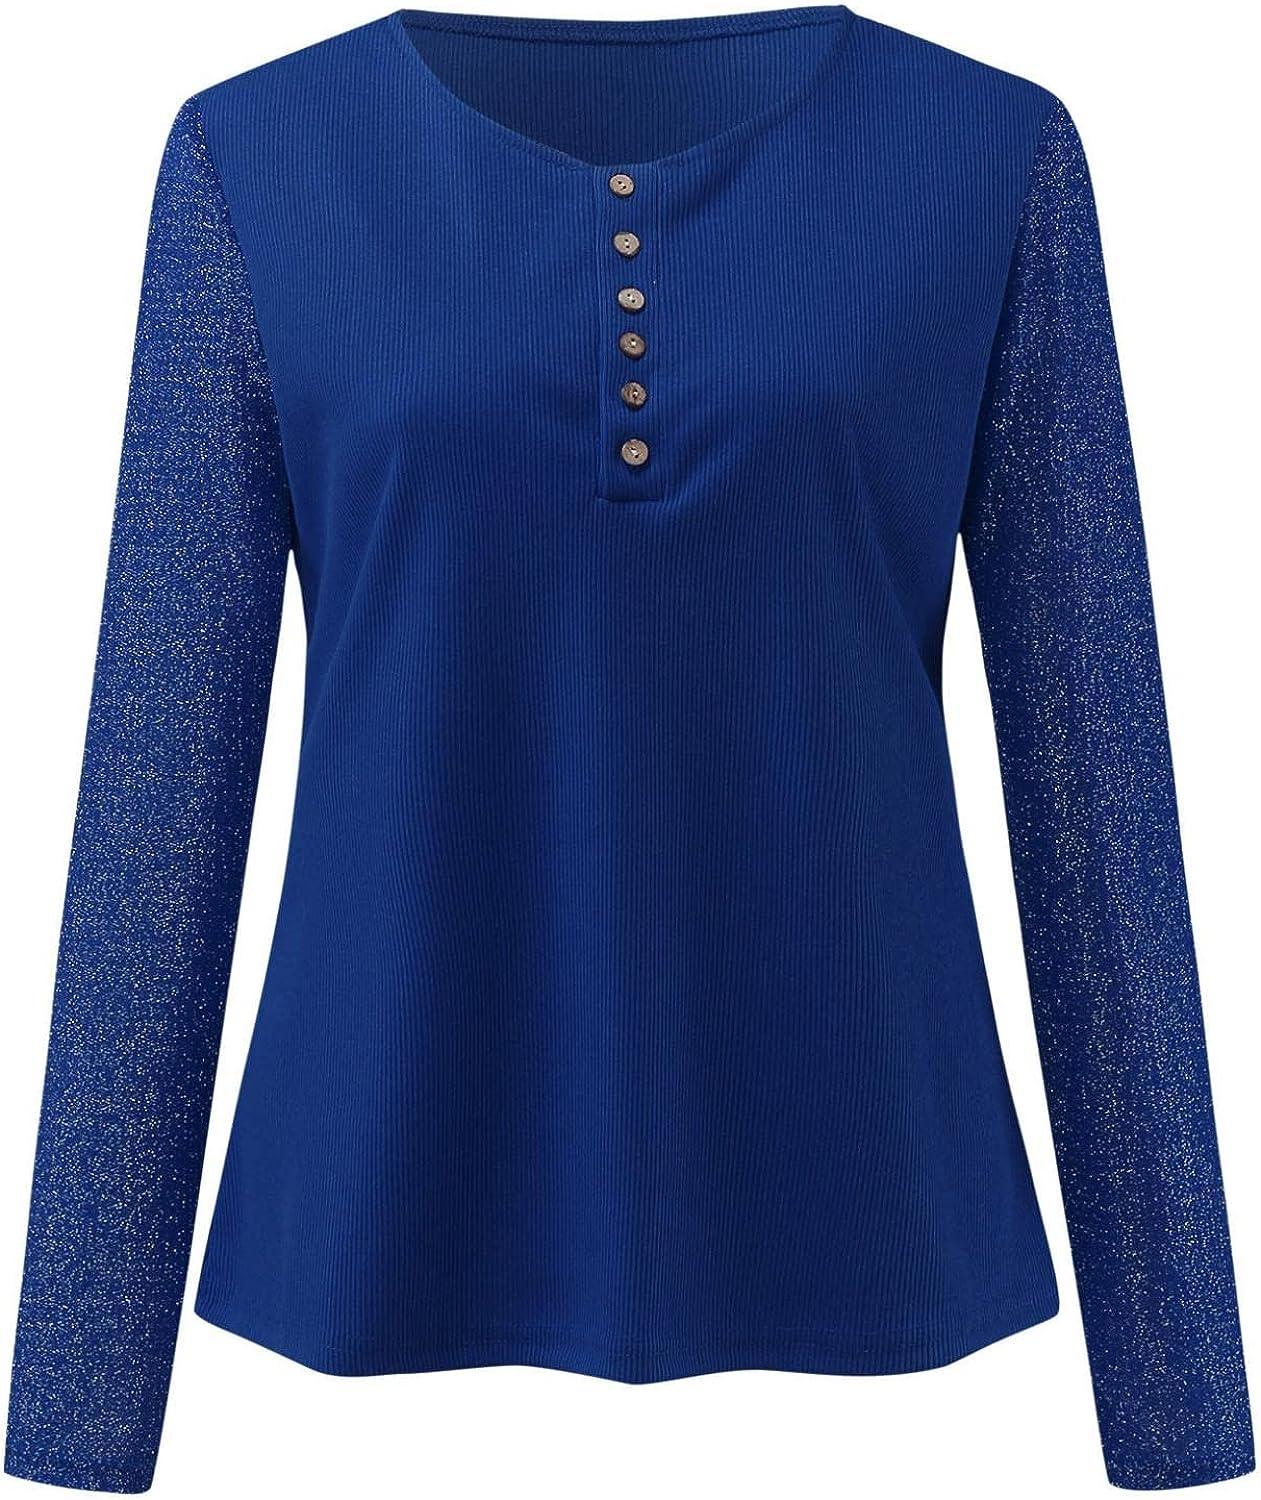 Long Sleeve Shirts for Women Fitted, Women's Long Sleeve Tops Lace